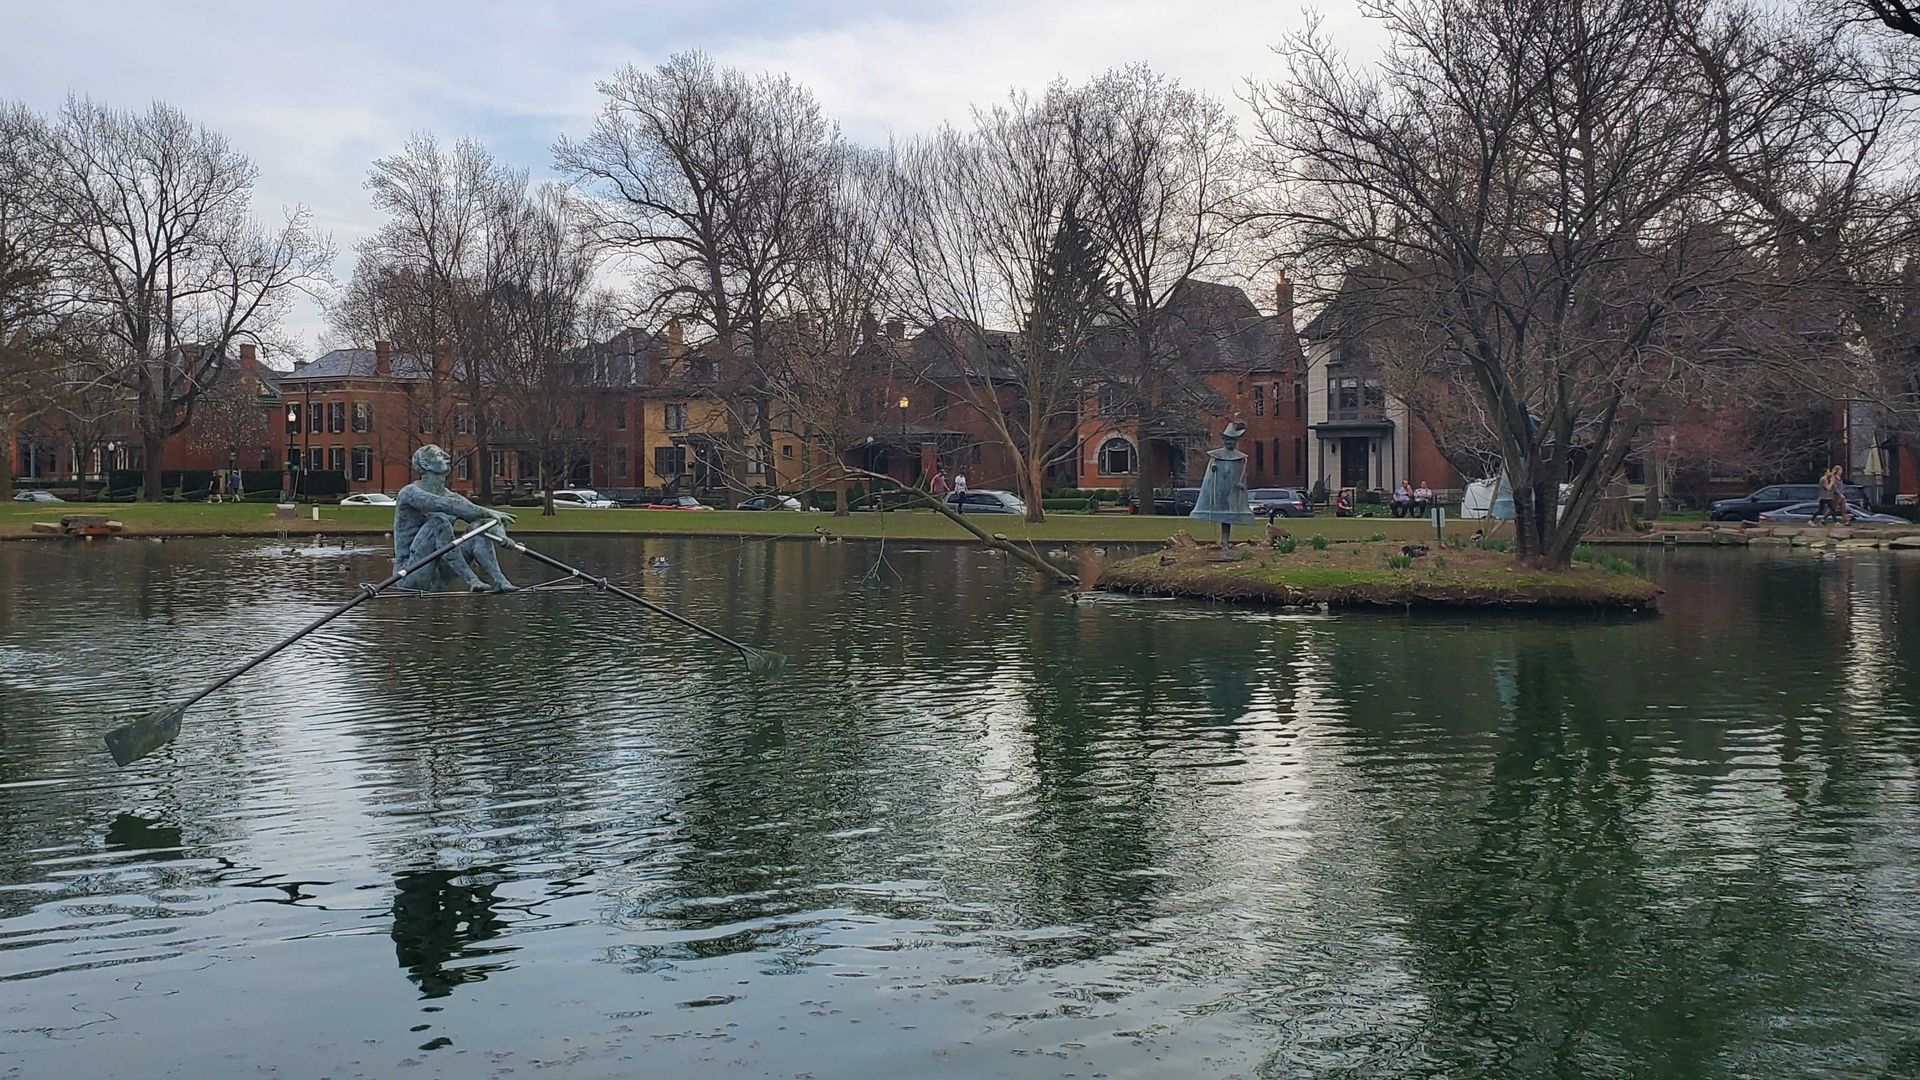 A sculpture of a rower hanging on a cable above a park lake.